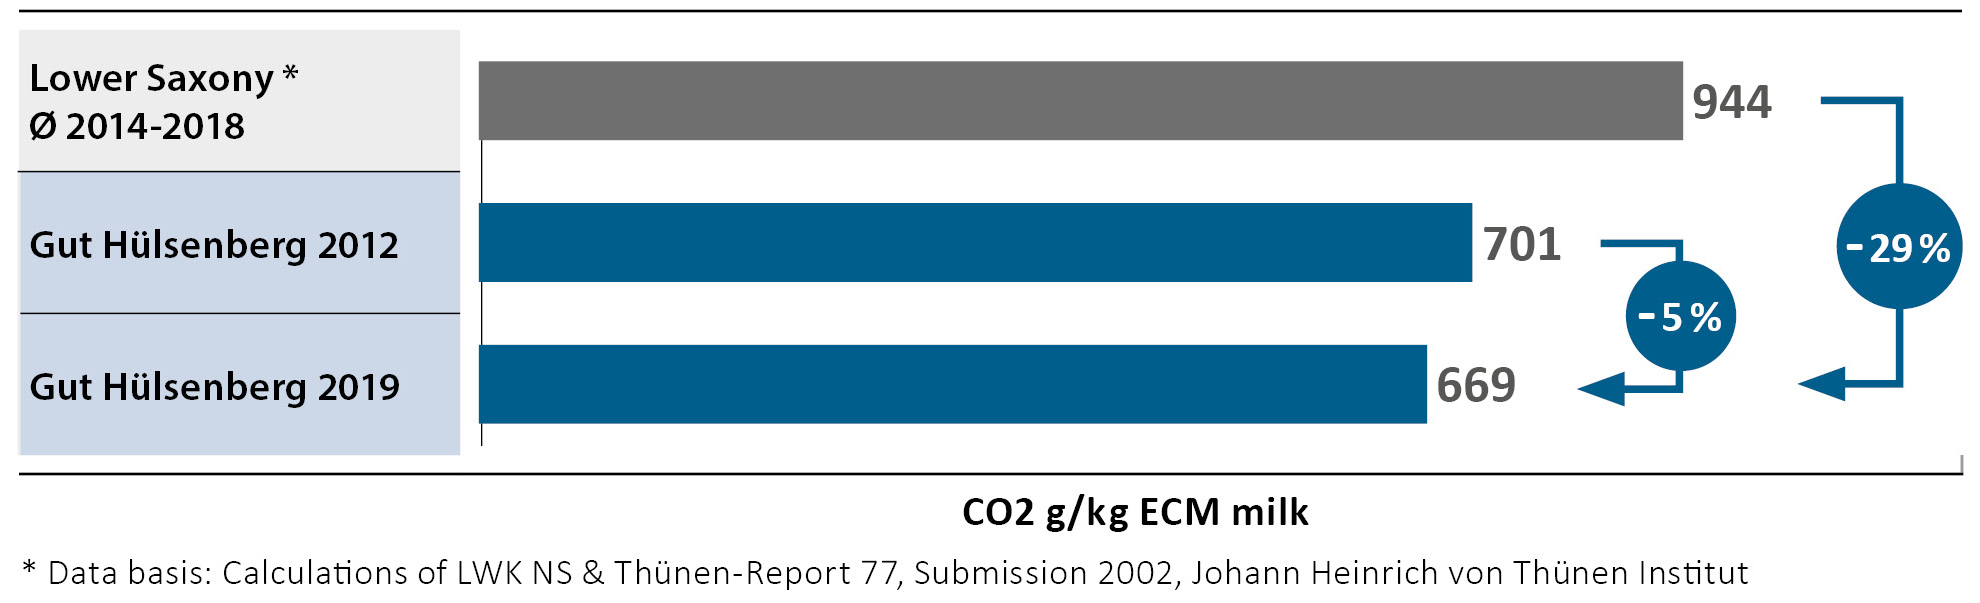 Comparison of greenhouse gas emissions from milk production at Gut Hülsenberg in 2012 and 2019